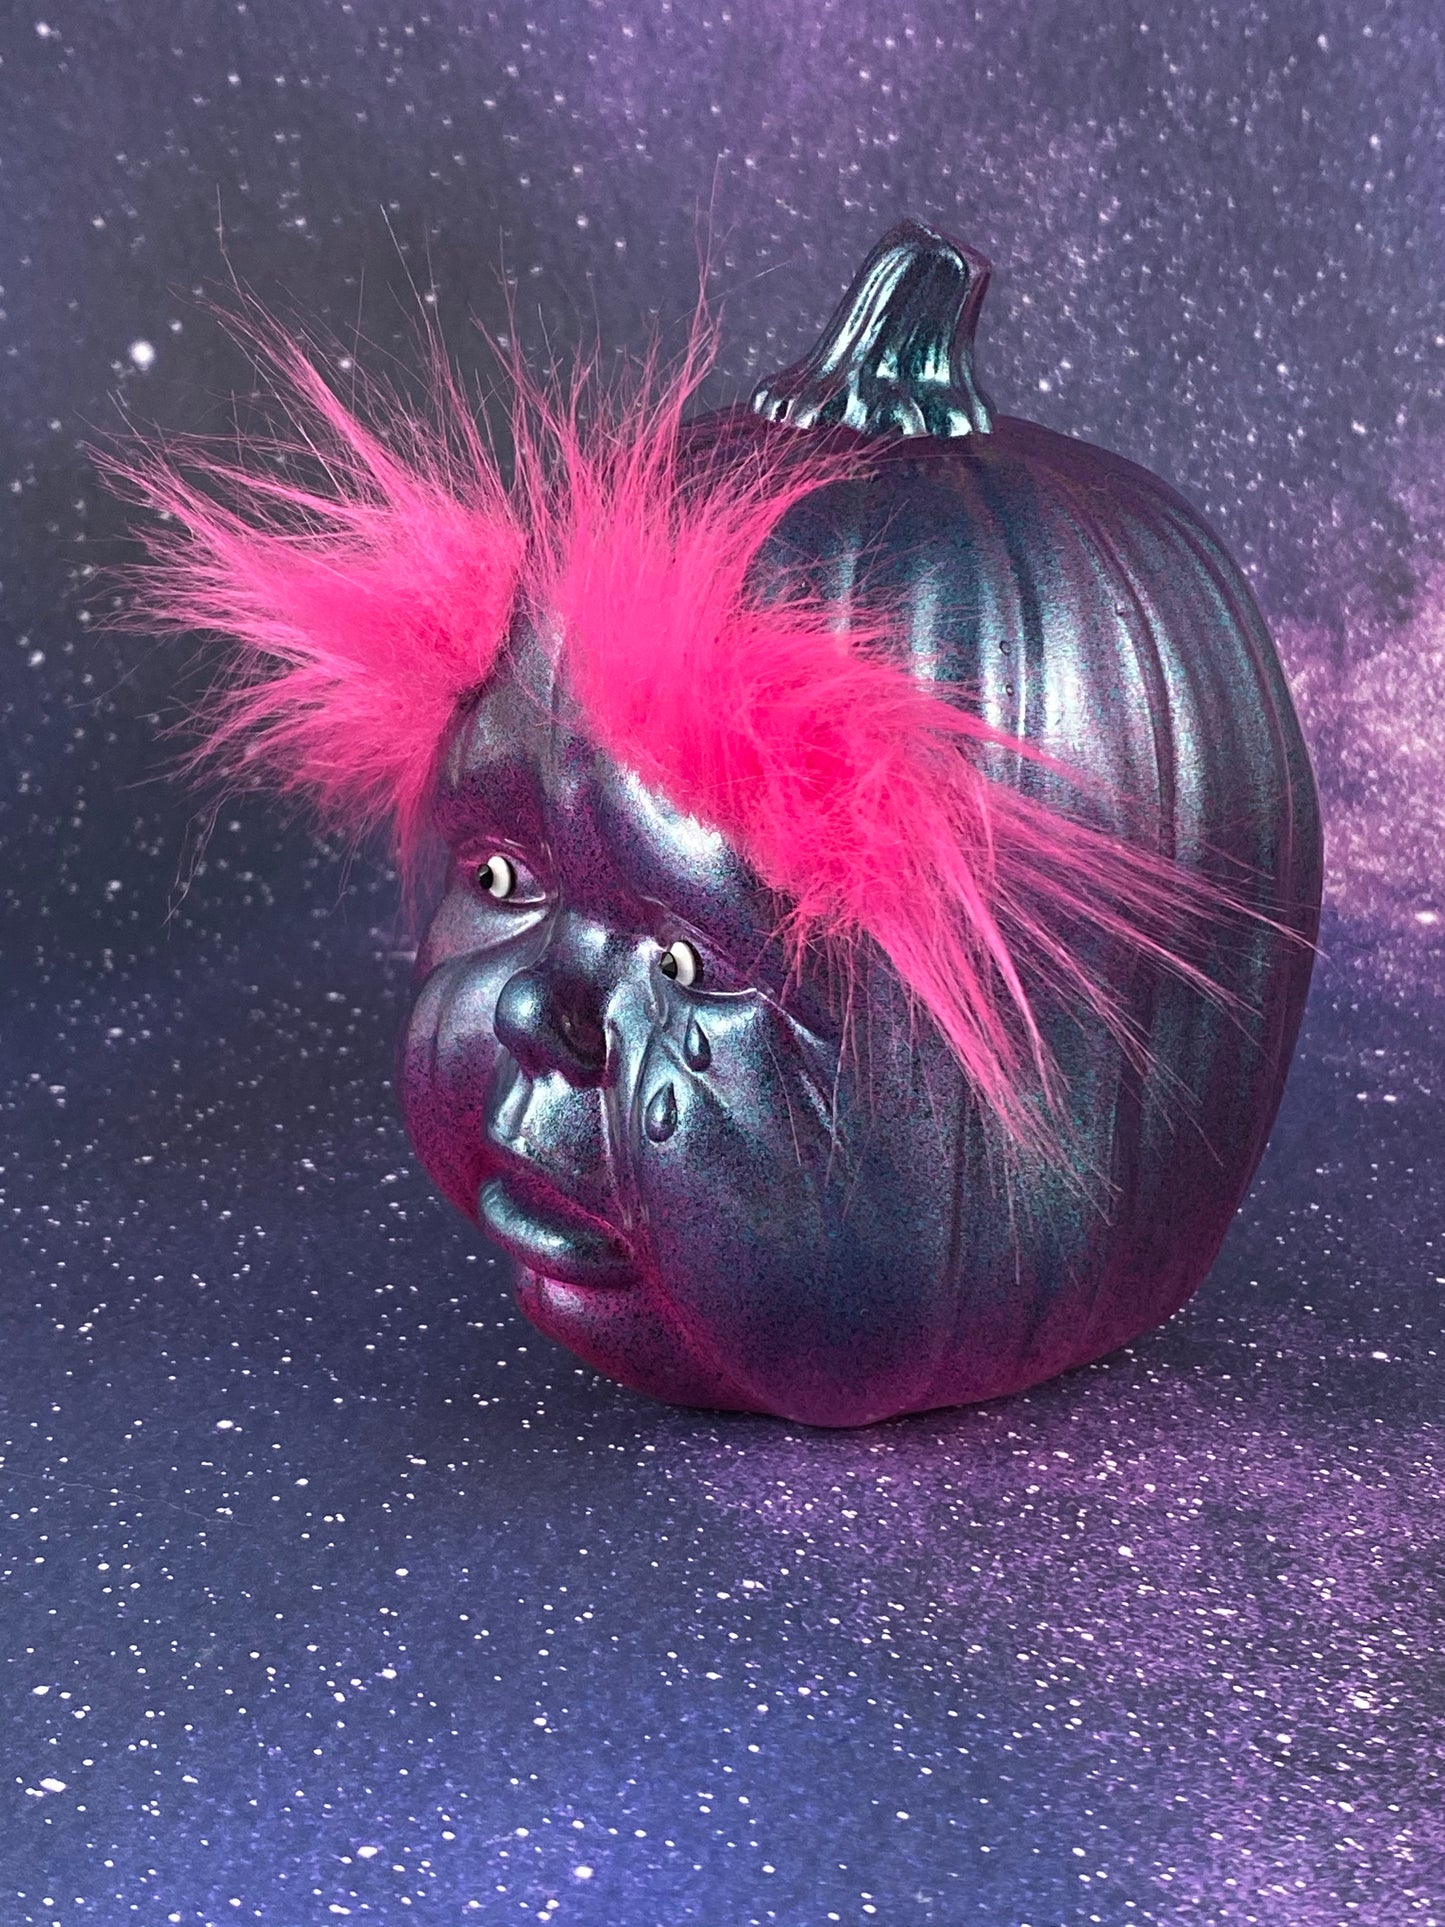 The Saddest Pumpkin with Bright Pink Eyebrows